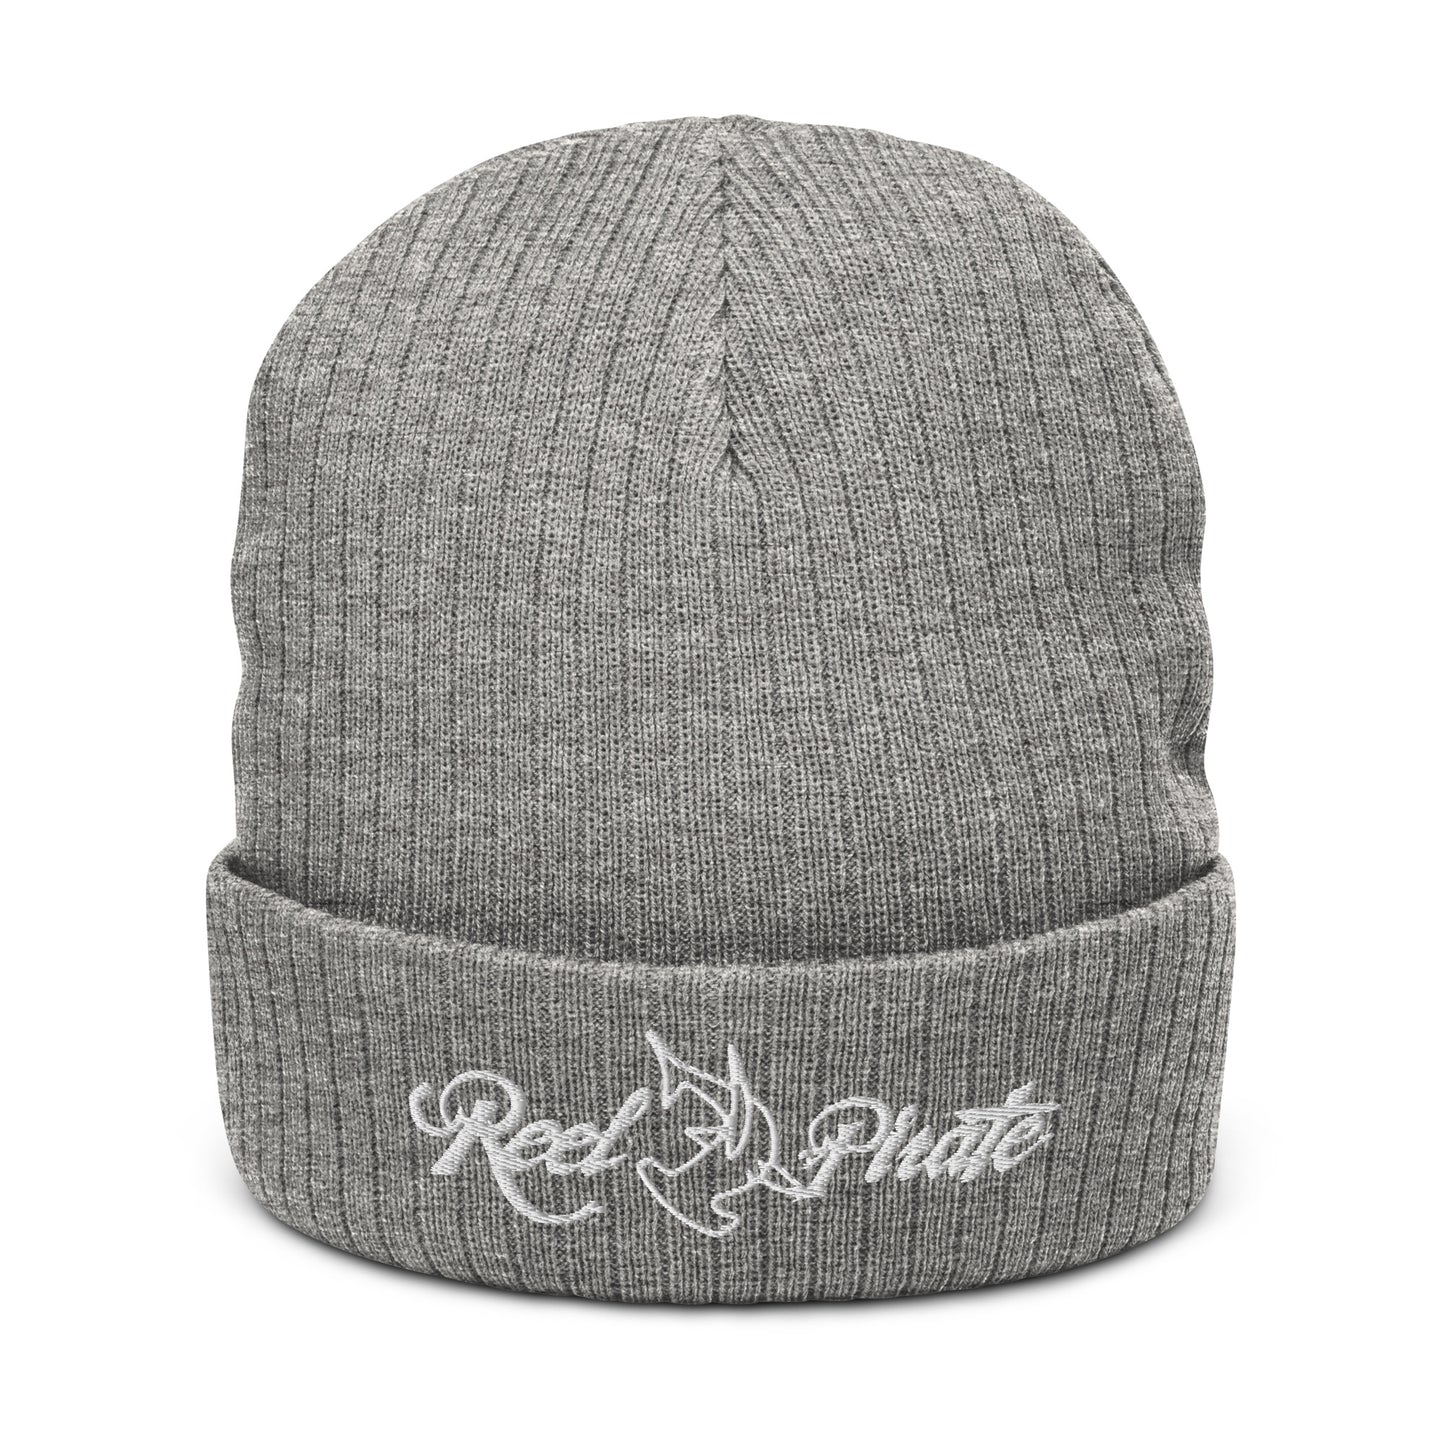 NEW HAMMER RP Ribbed knit beanie